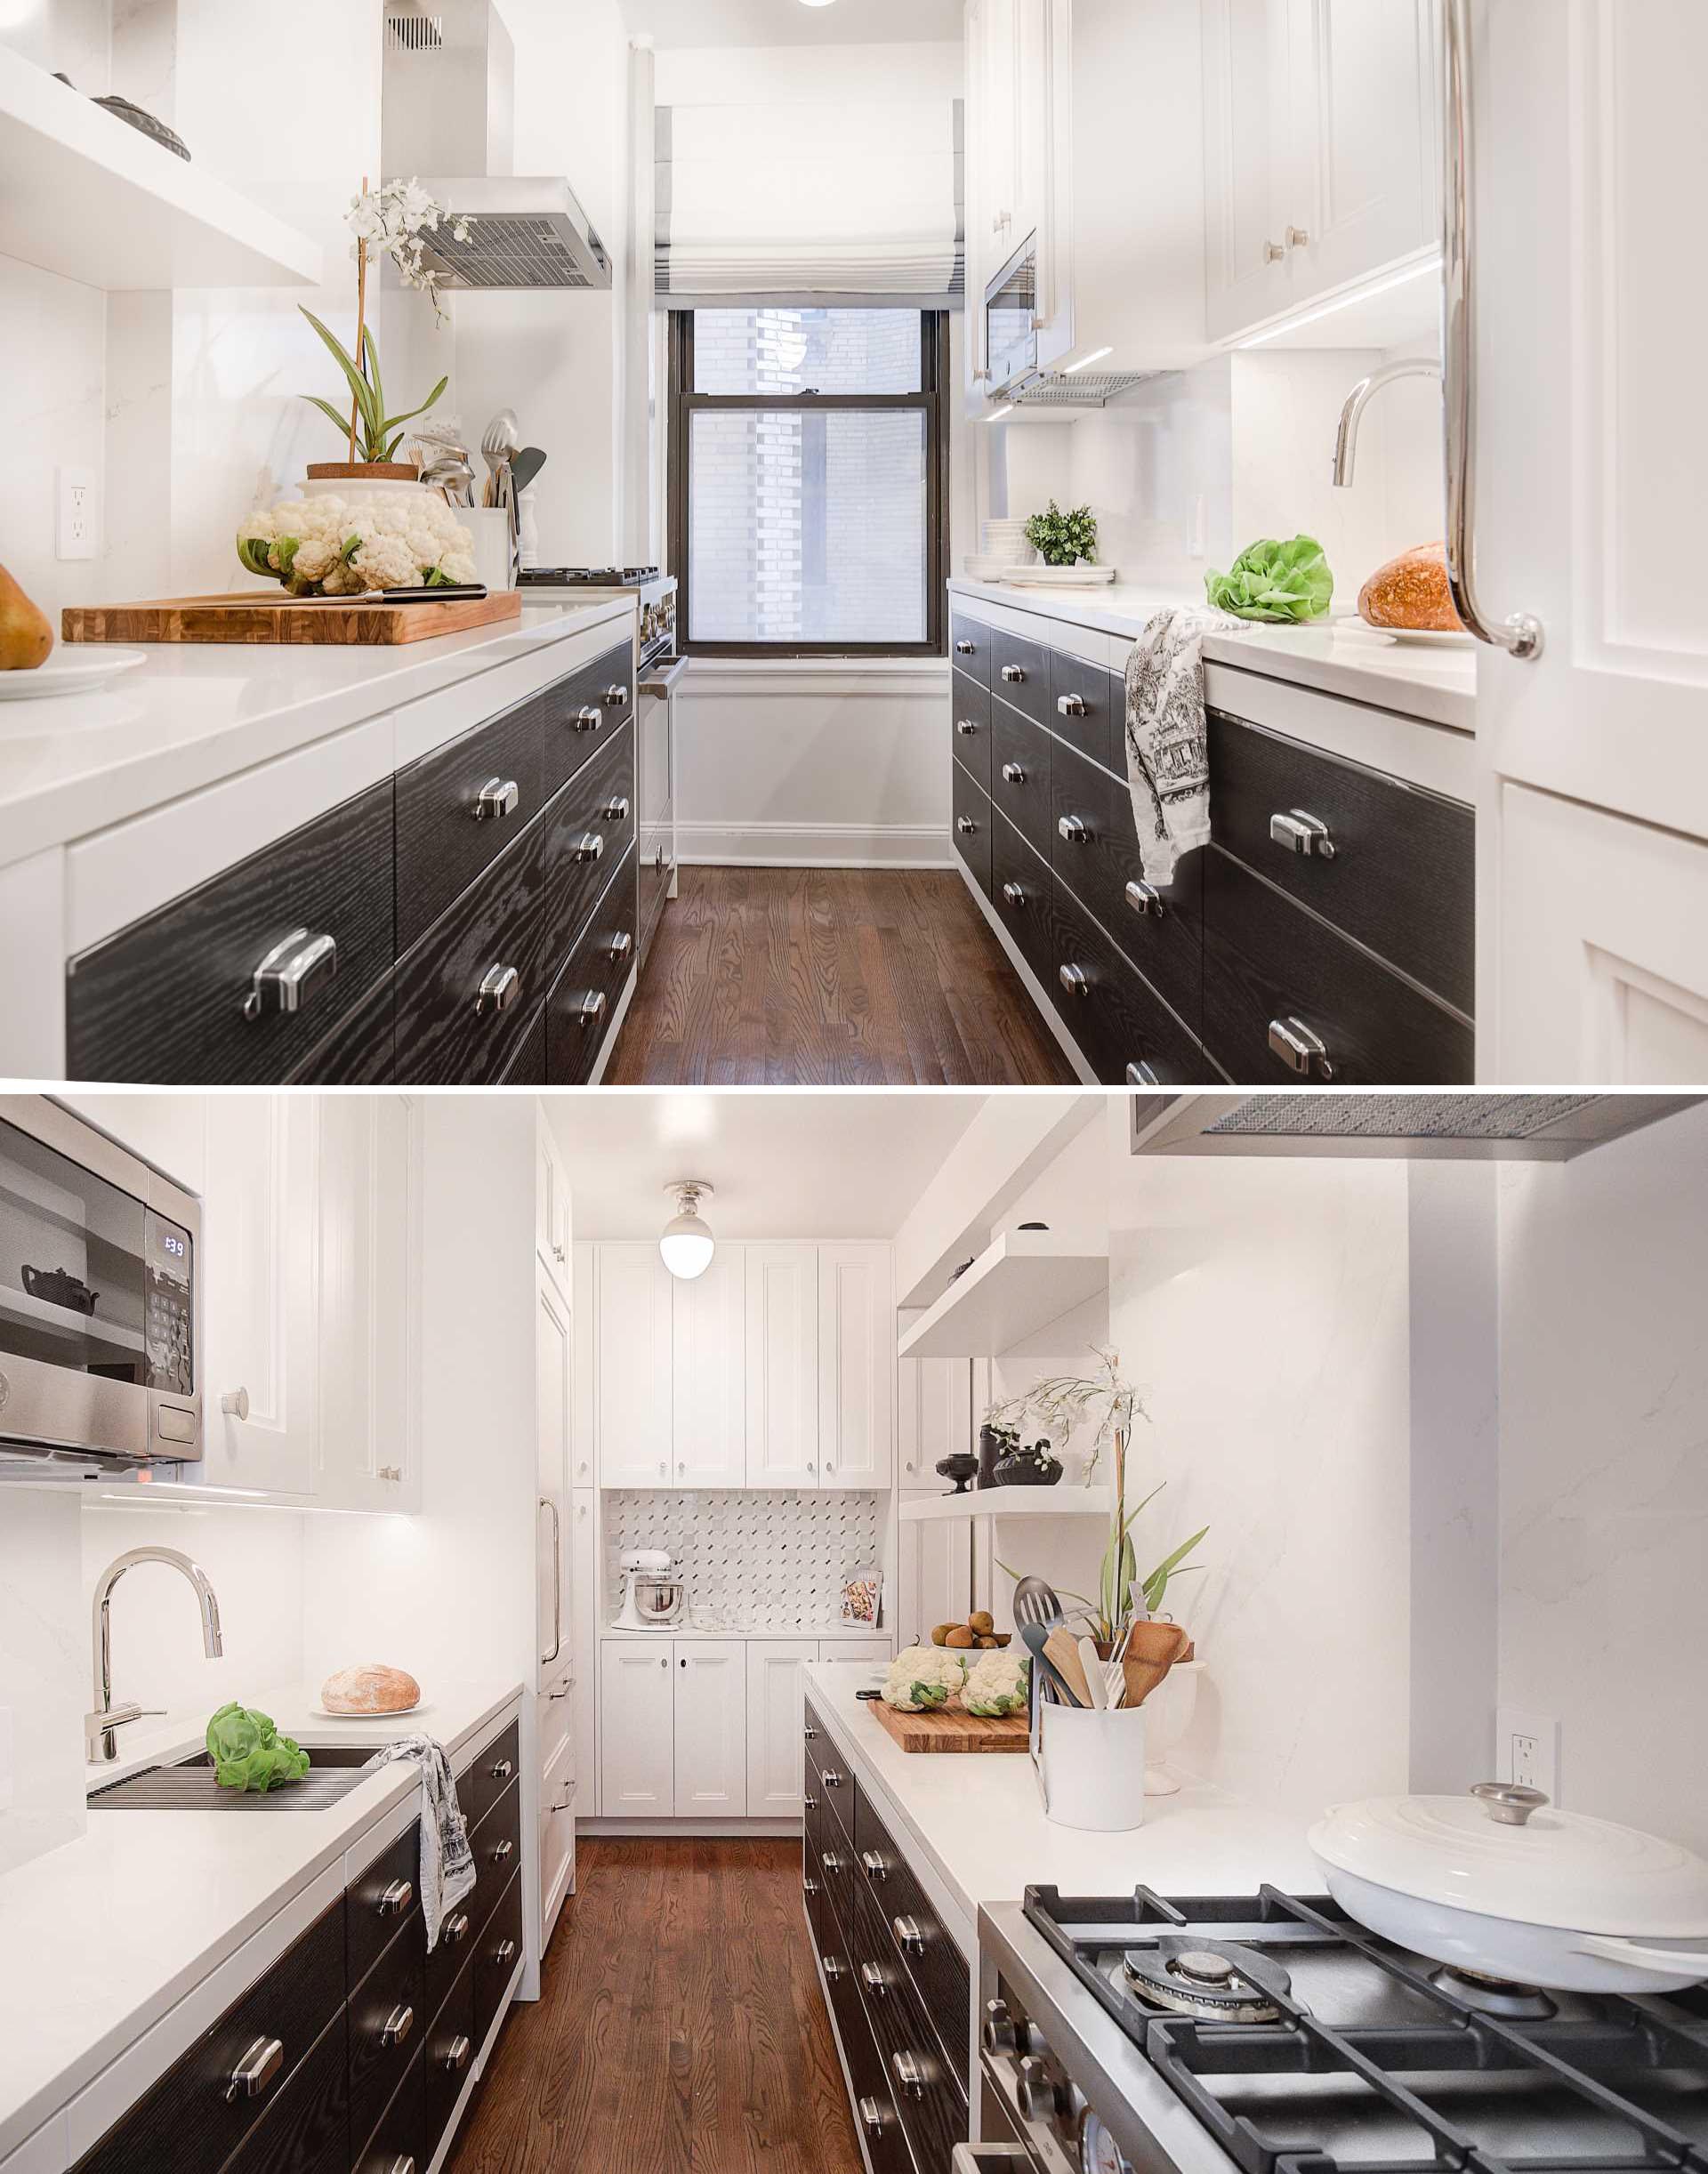 Under cabinet lighting and the new white upper cabinets and countertops, help to keep this small kitchen bright and make it feel more open.